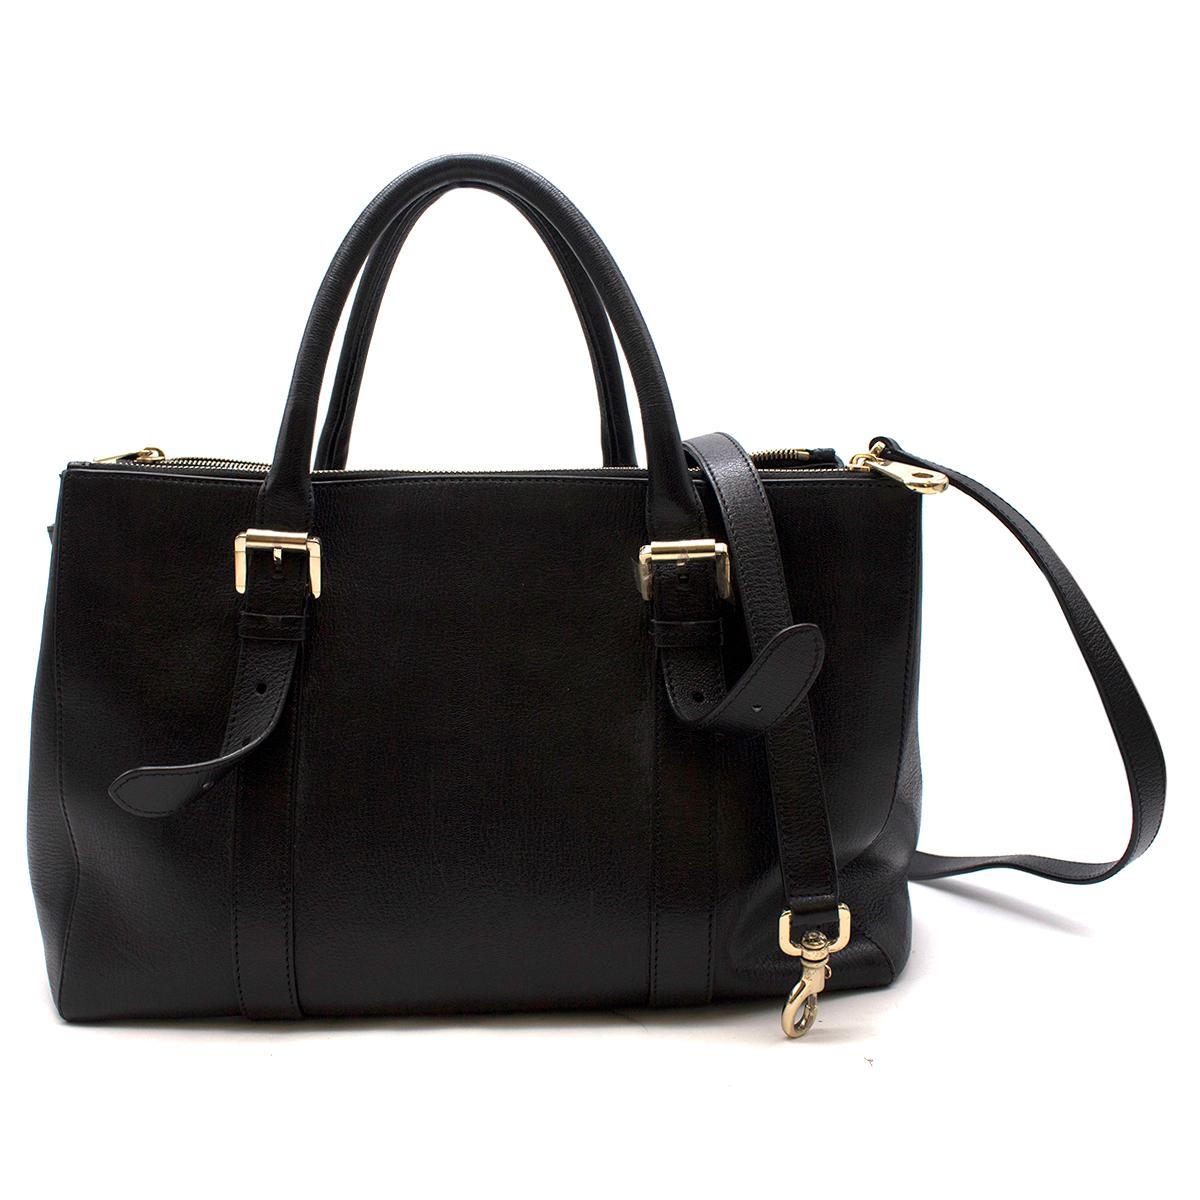 Mulberry Black Leather Top Handle Shoulder Bag

- Top Handle Shoulder Bag in black leather 
- The bag can be worn as a top hand bag, on the shoulders or across the body
- Detachable leather shoulder strap
- Two top handles
- Gold-tone hardware
-